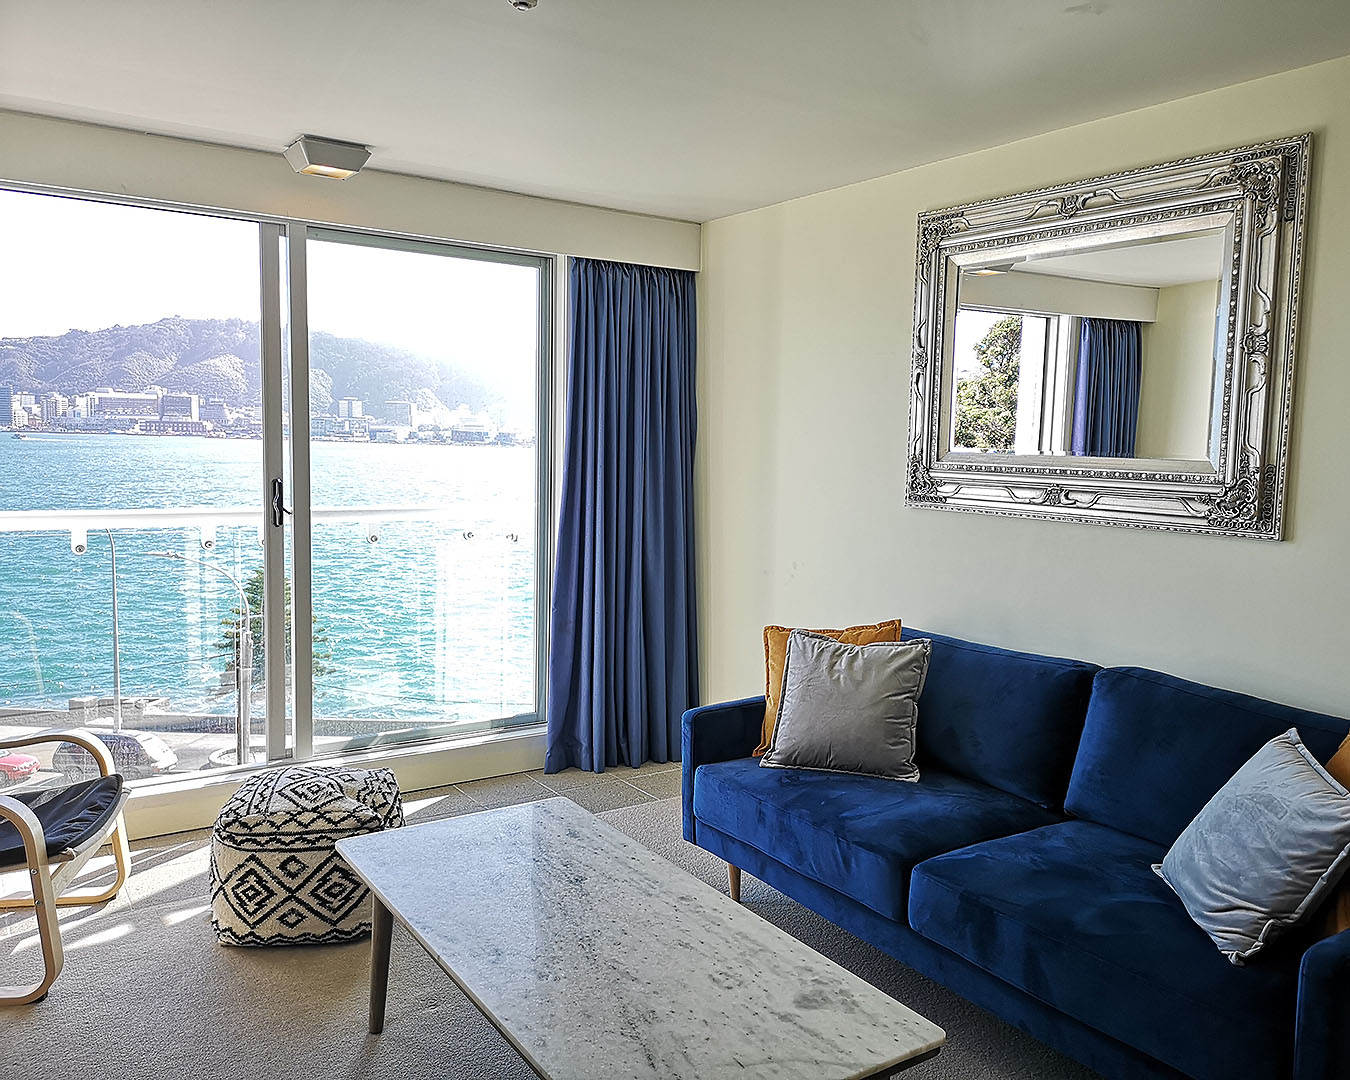 The stunning harbour views at the 180 Degree View Home shine through the lounge balcony window.